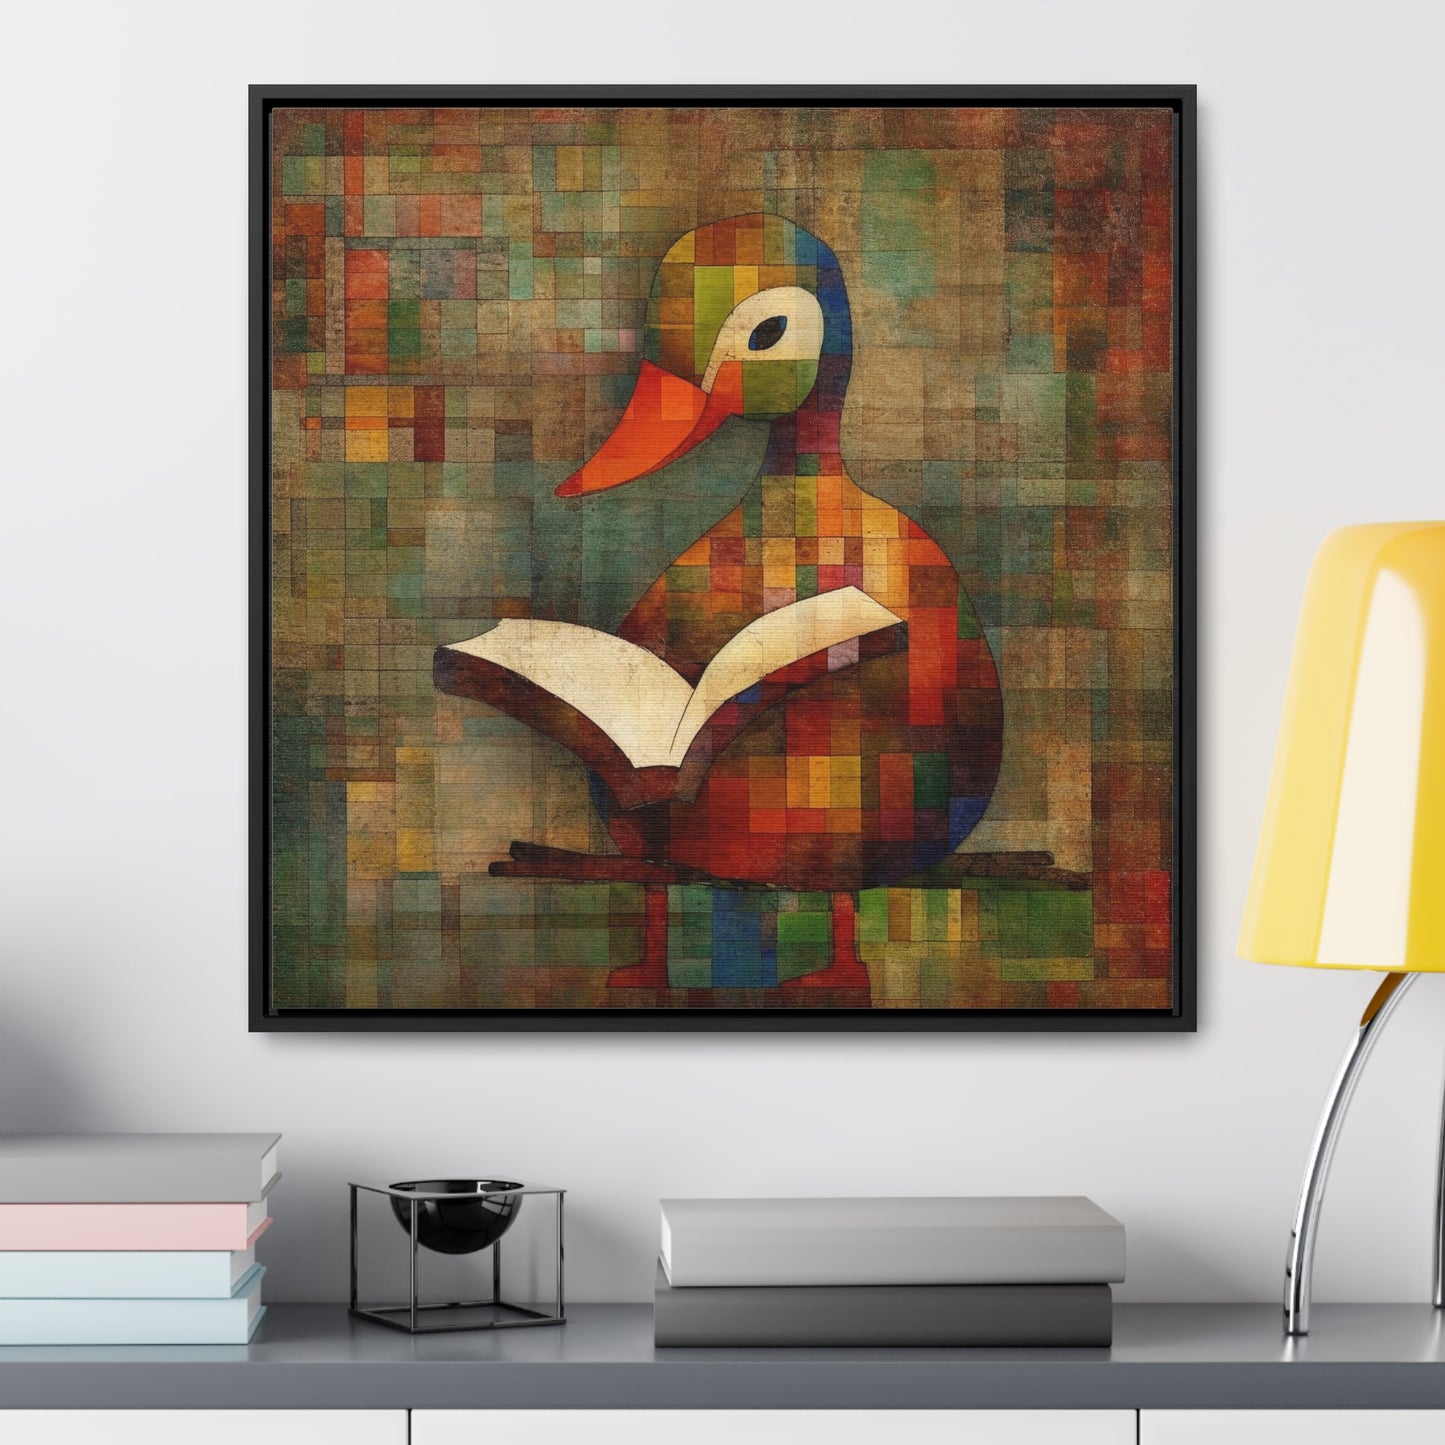 Duck 6, Gallery Canvas Wraps, Square Frame